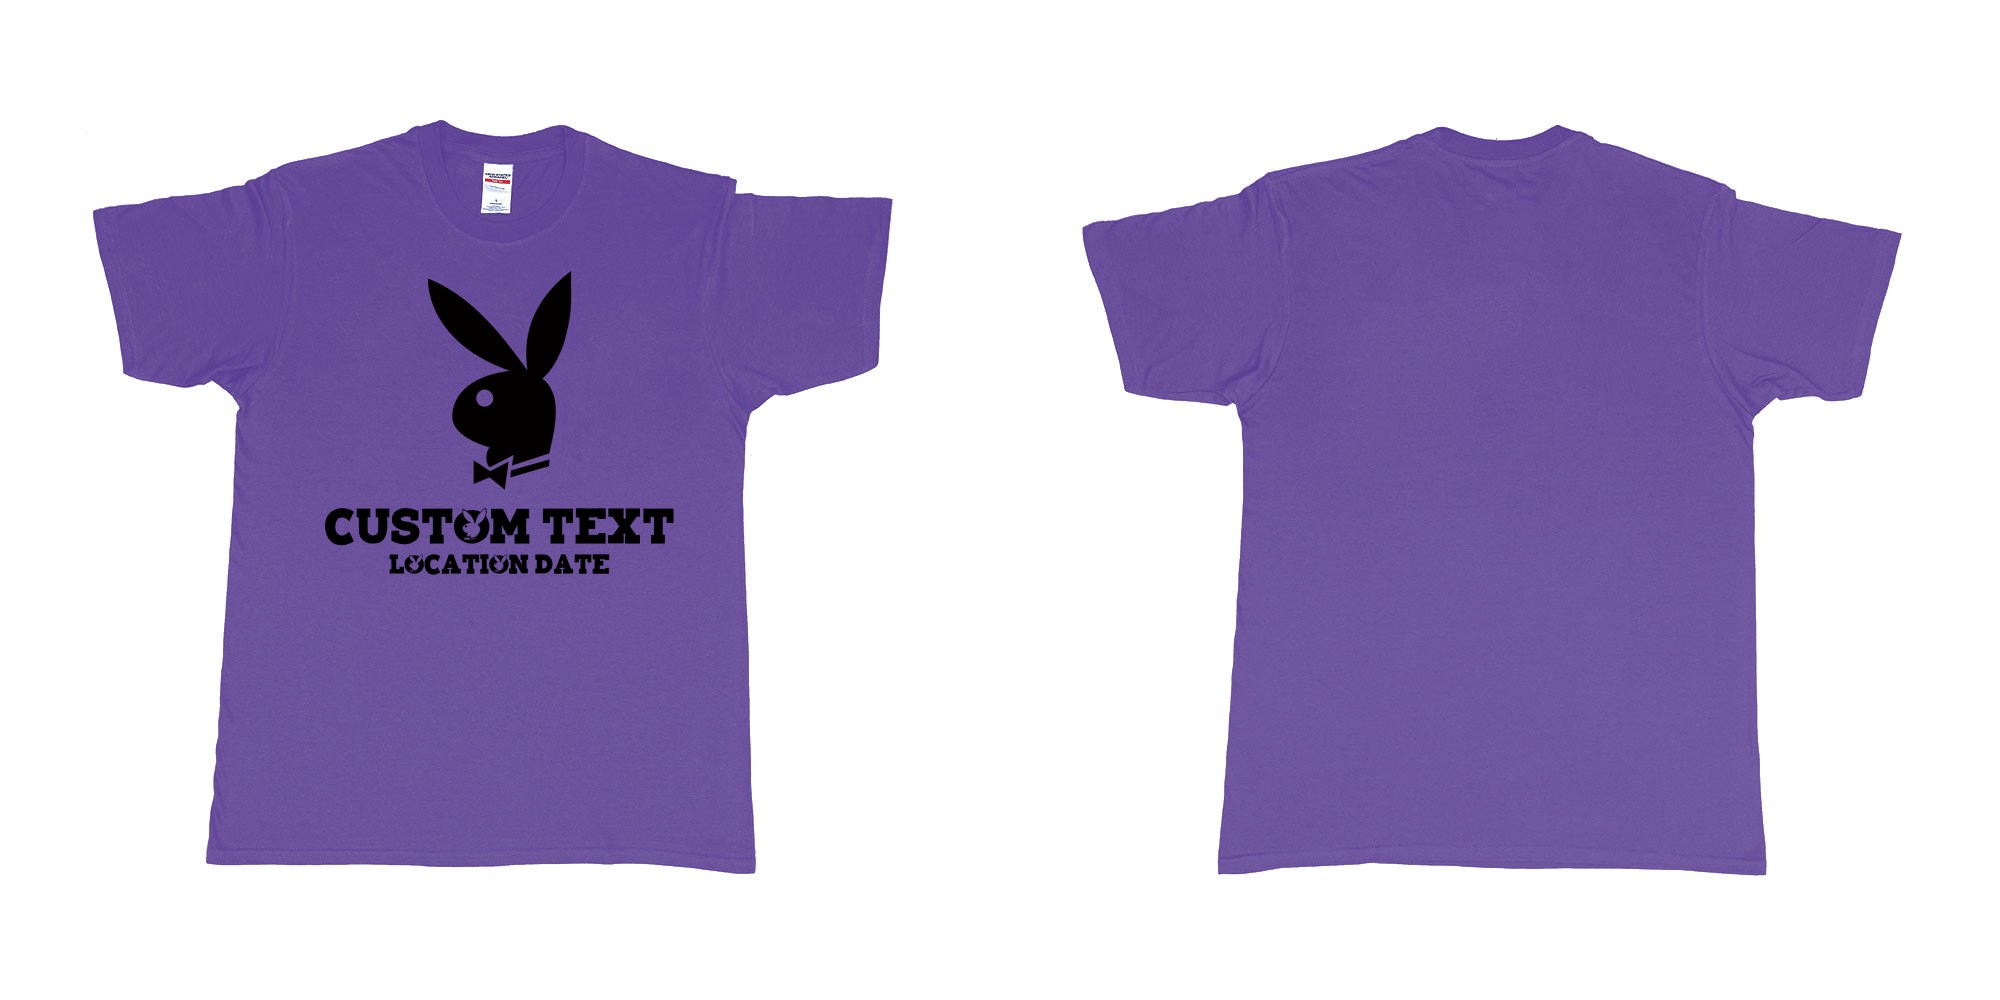 Custom tshirt design playboy playgirl custom text tshirt in fabric color purple choice your own text made in Bali by The Pirate Way